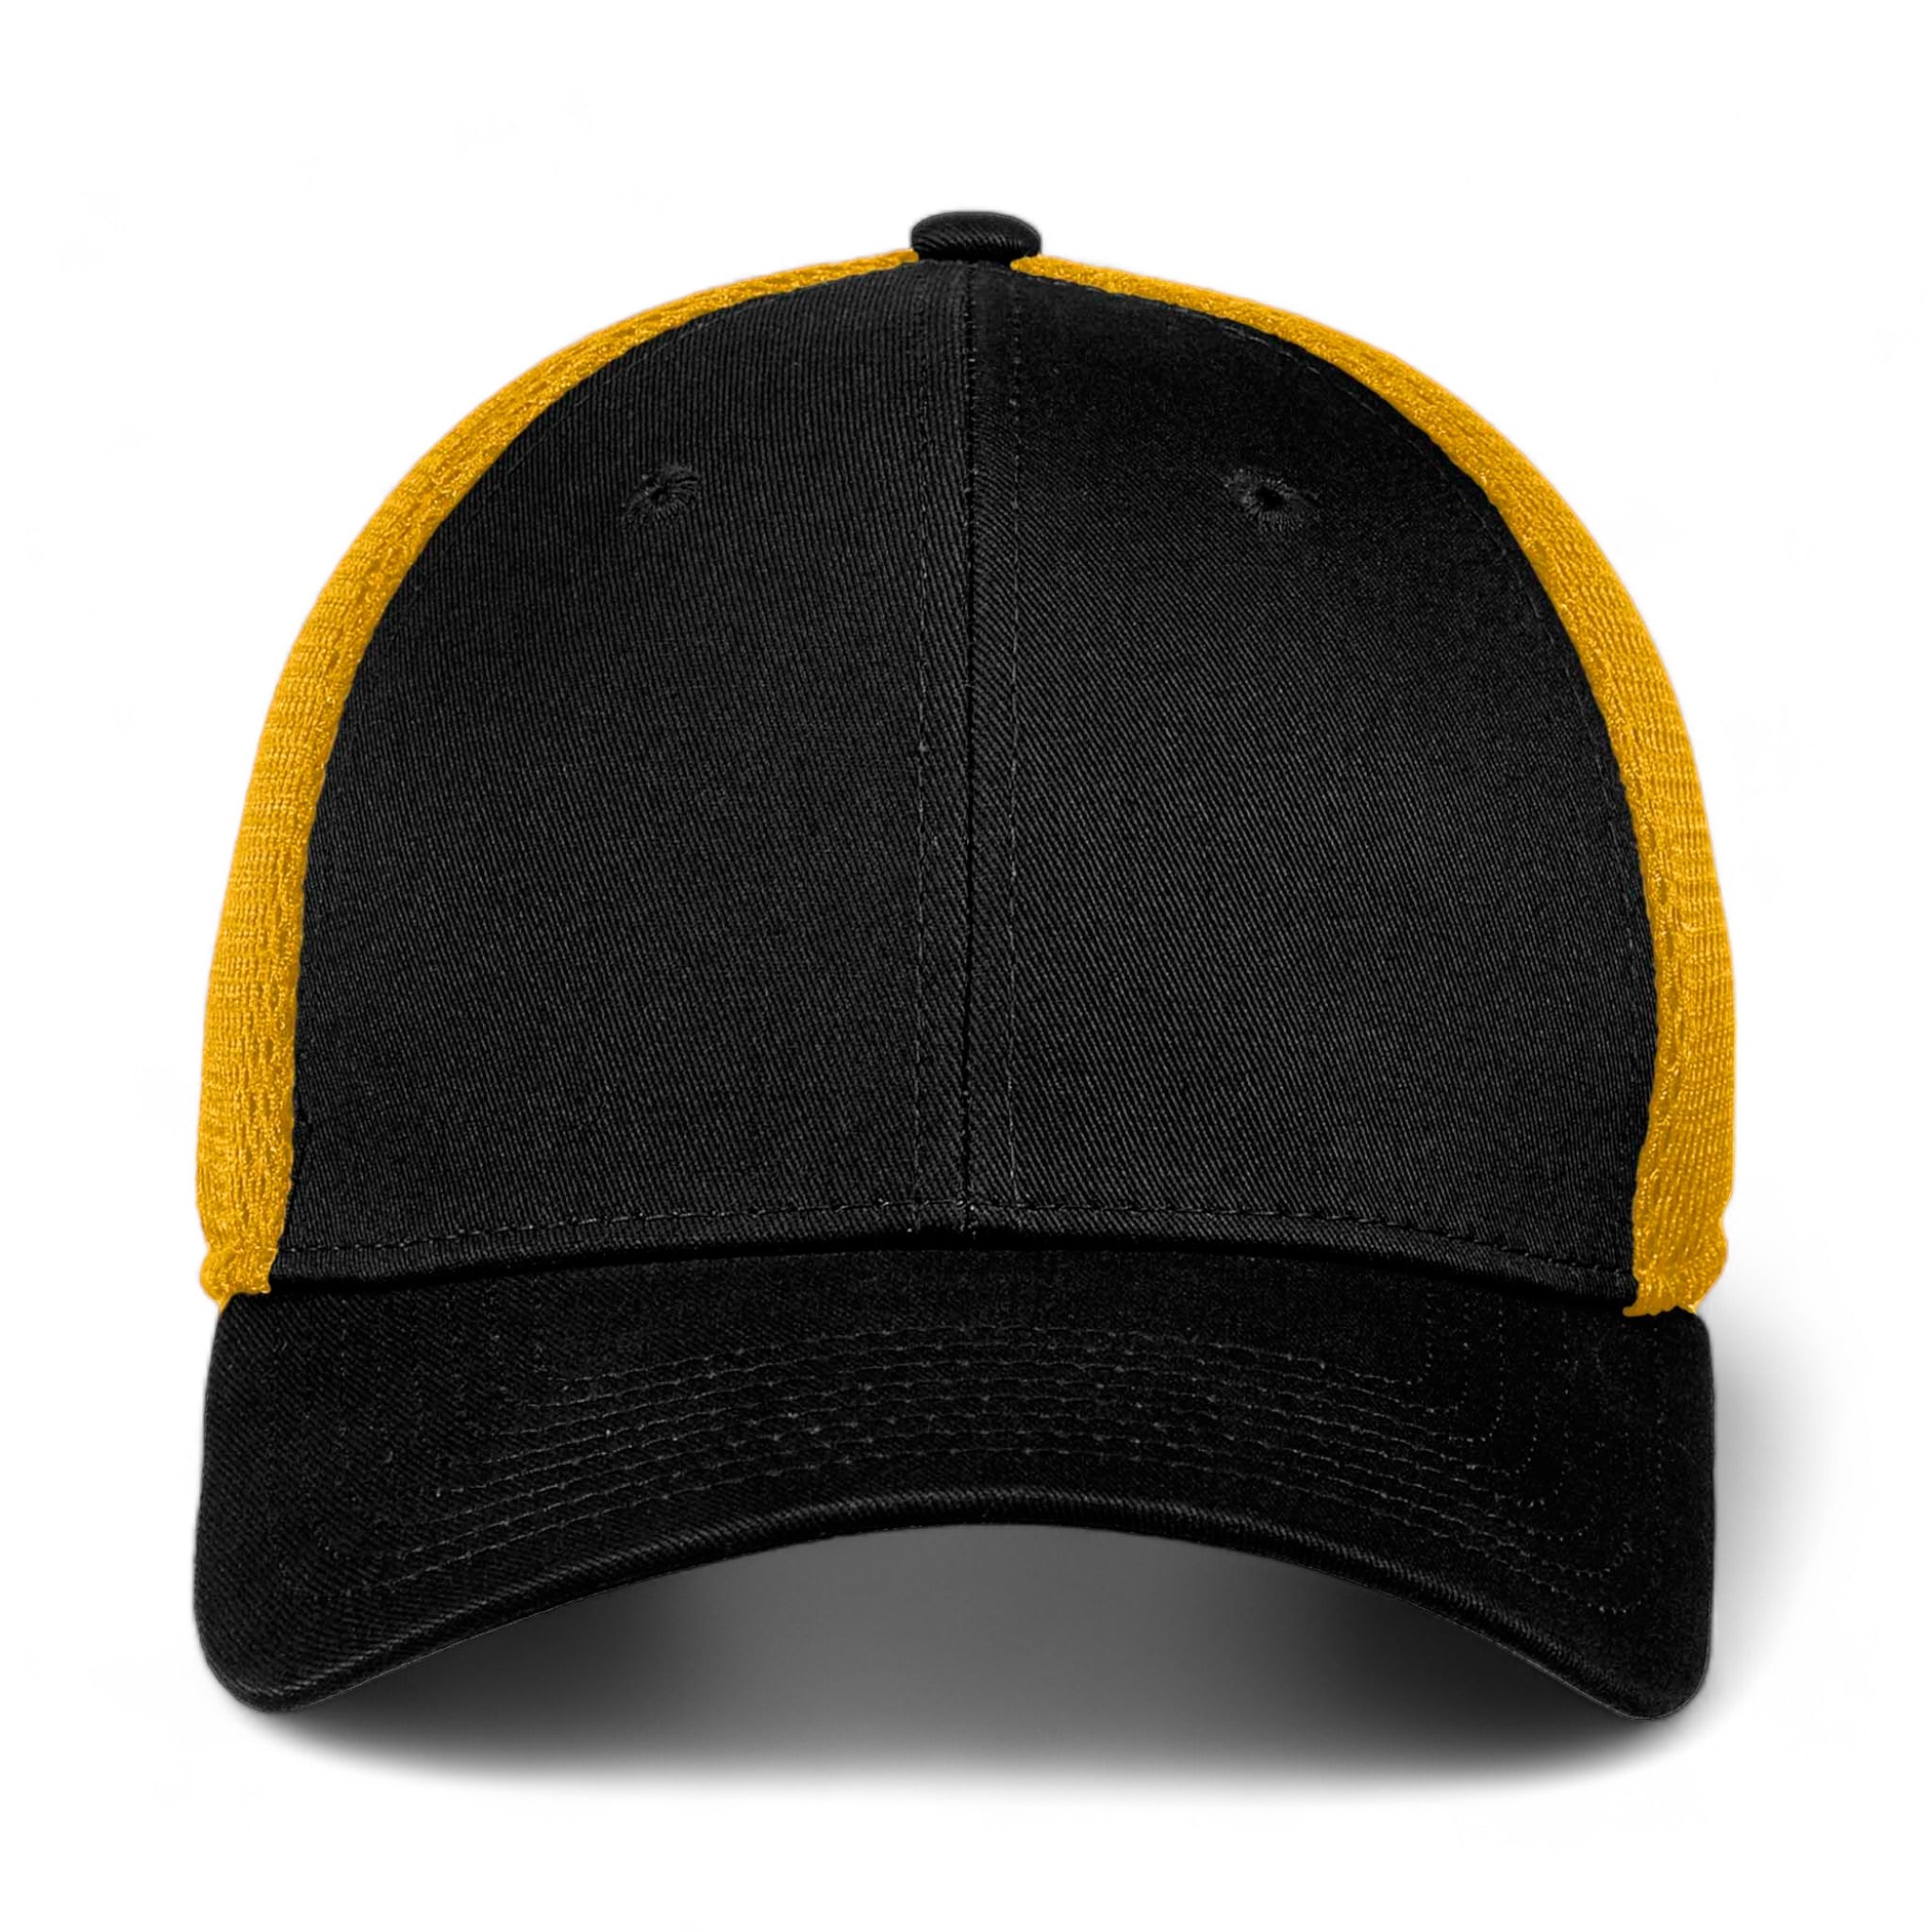 Front view of New Era NE1020 custom hat in black and gold